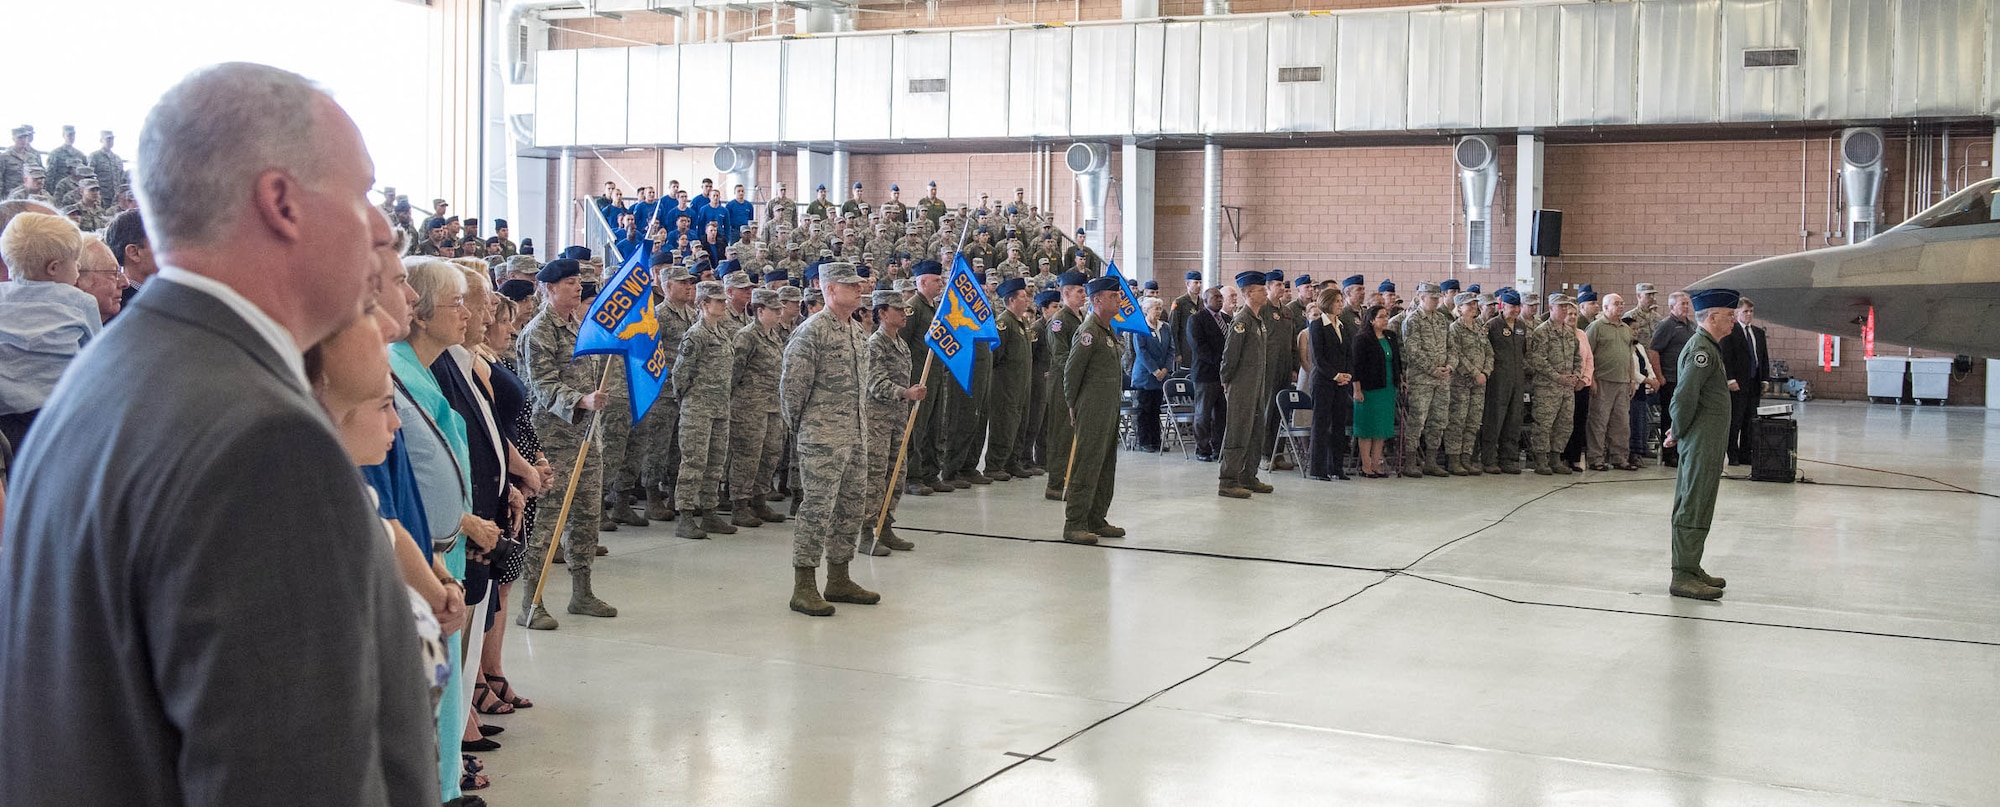 A formation of 926th Wing members prepare to present Col. Michael Schultz with his first salute during a Change of Command ceremony at the Lightning hangar. Schultz took command from Col. Ross Anderson on Oct. 14.